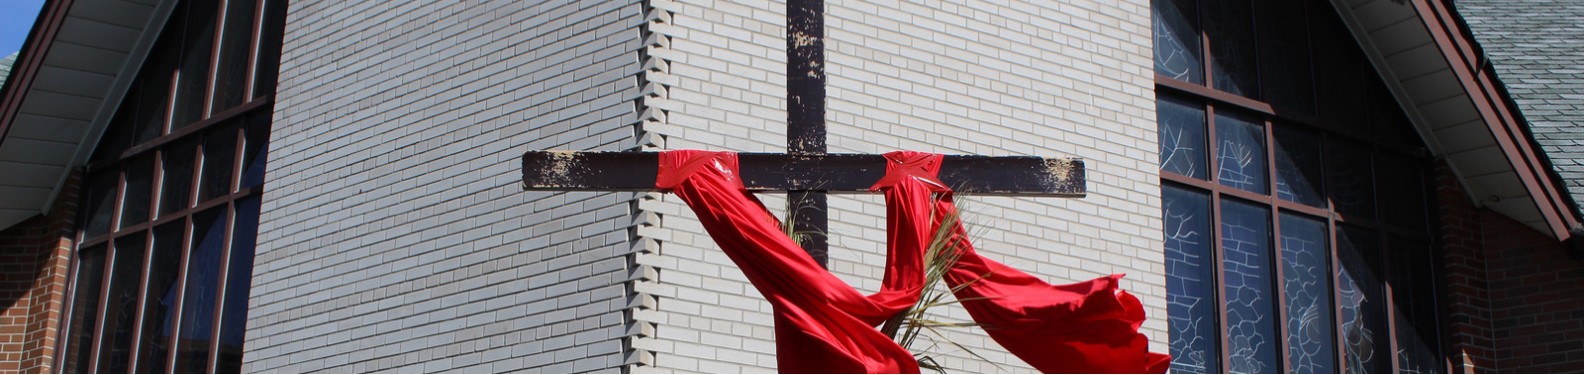 Wooden Cross outside on St. Jude's lawn with red cloth draped on both sides